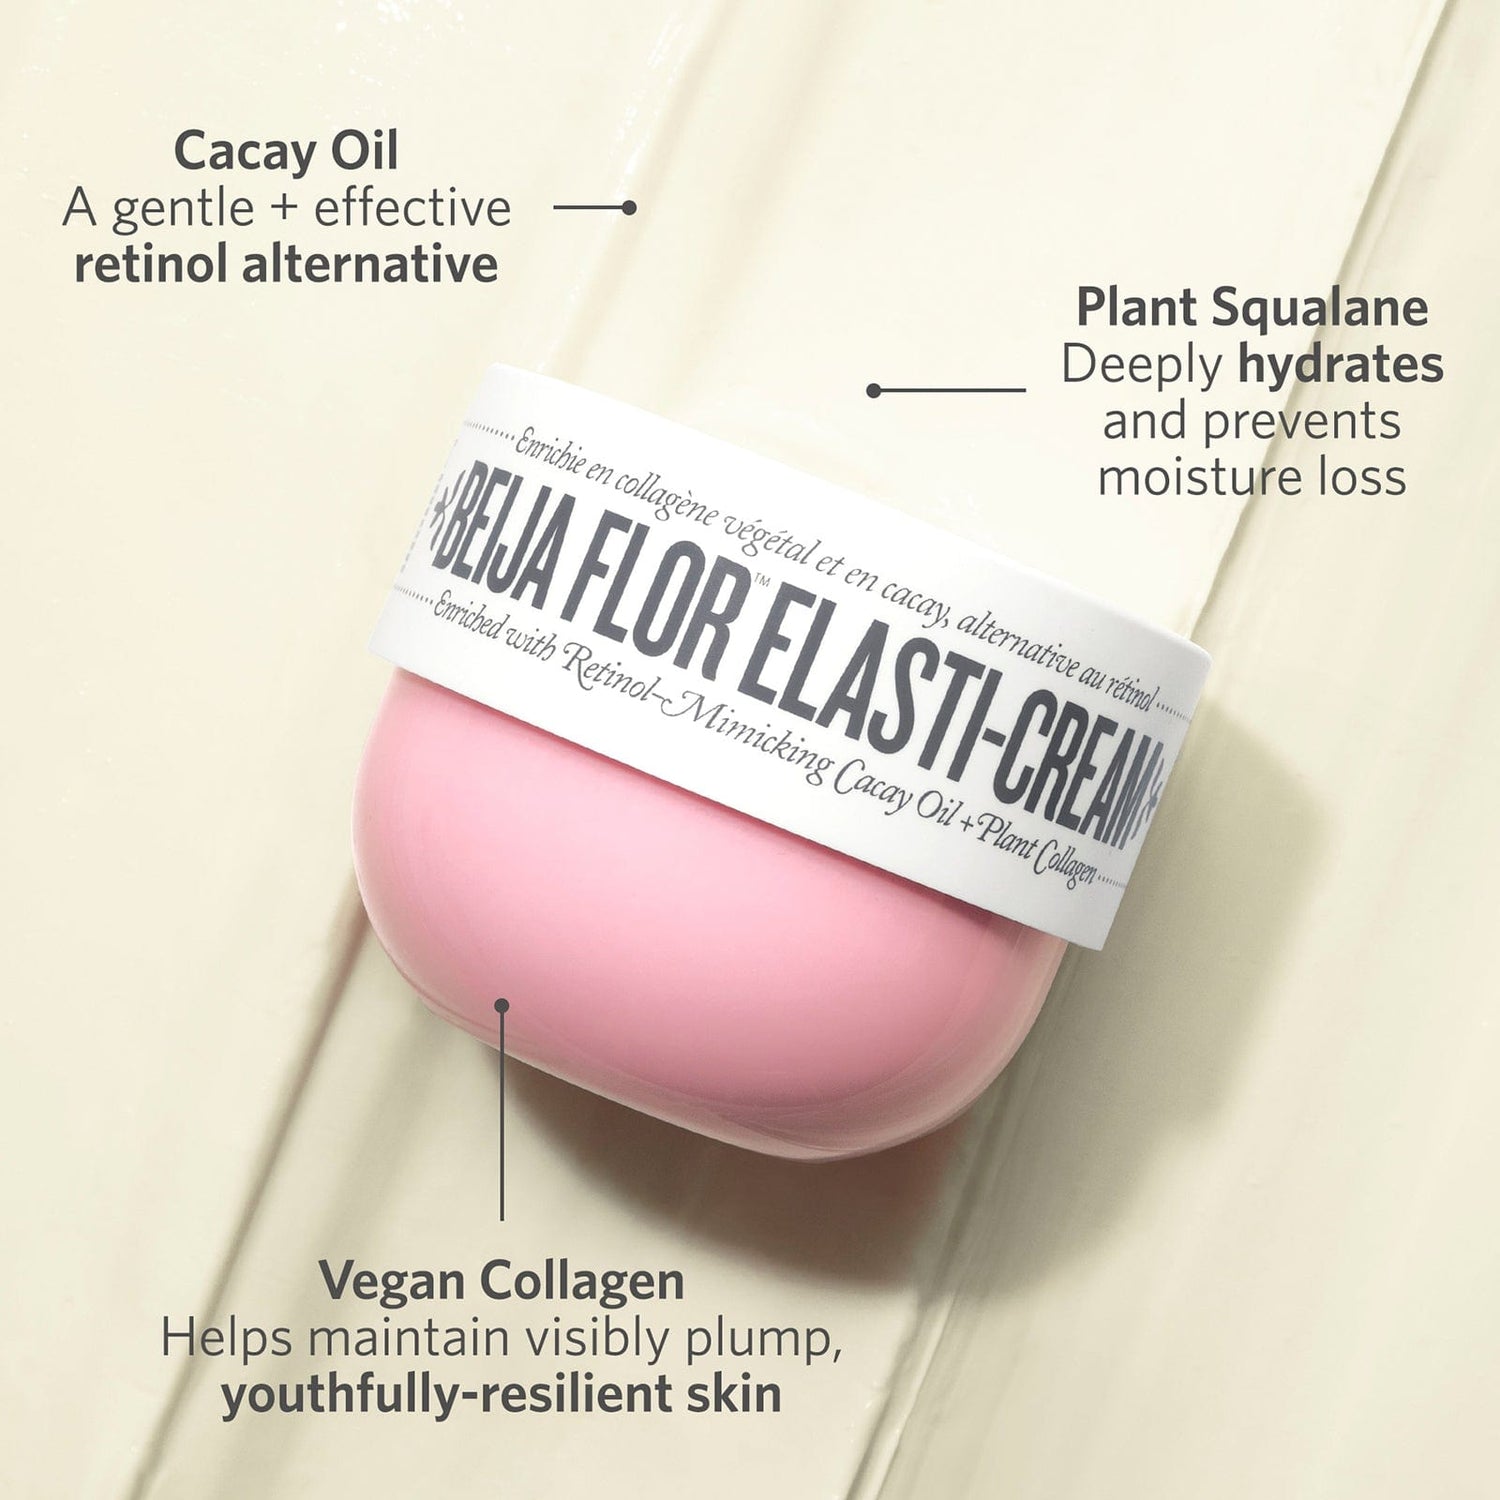 Cacay oil: a gentle and effective retinol alternative | Plant Squalane: Deeply hydrates and prevents moisture loss | Vegan Collagen: Helps maintain visibly plump youthfully-resilient skin | Beija flor elasti-cream | Sol de Janeiro